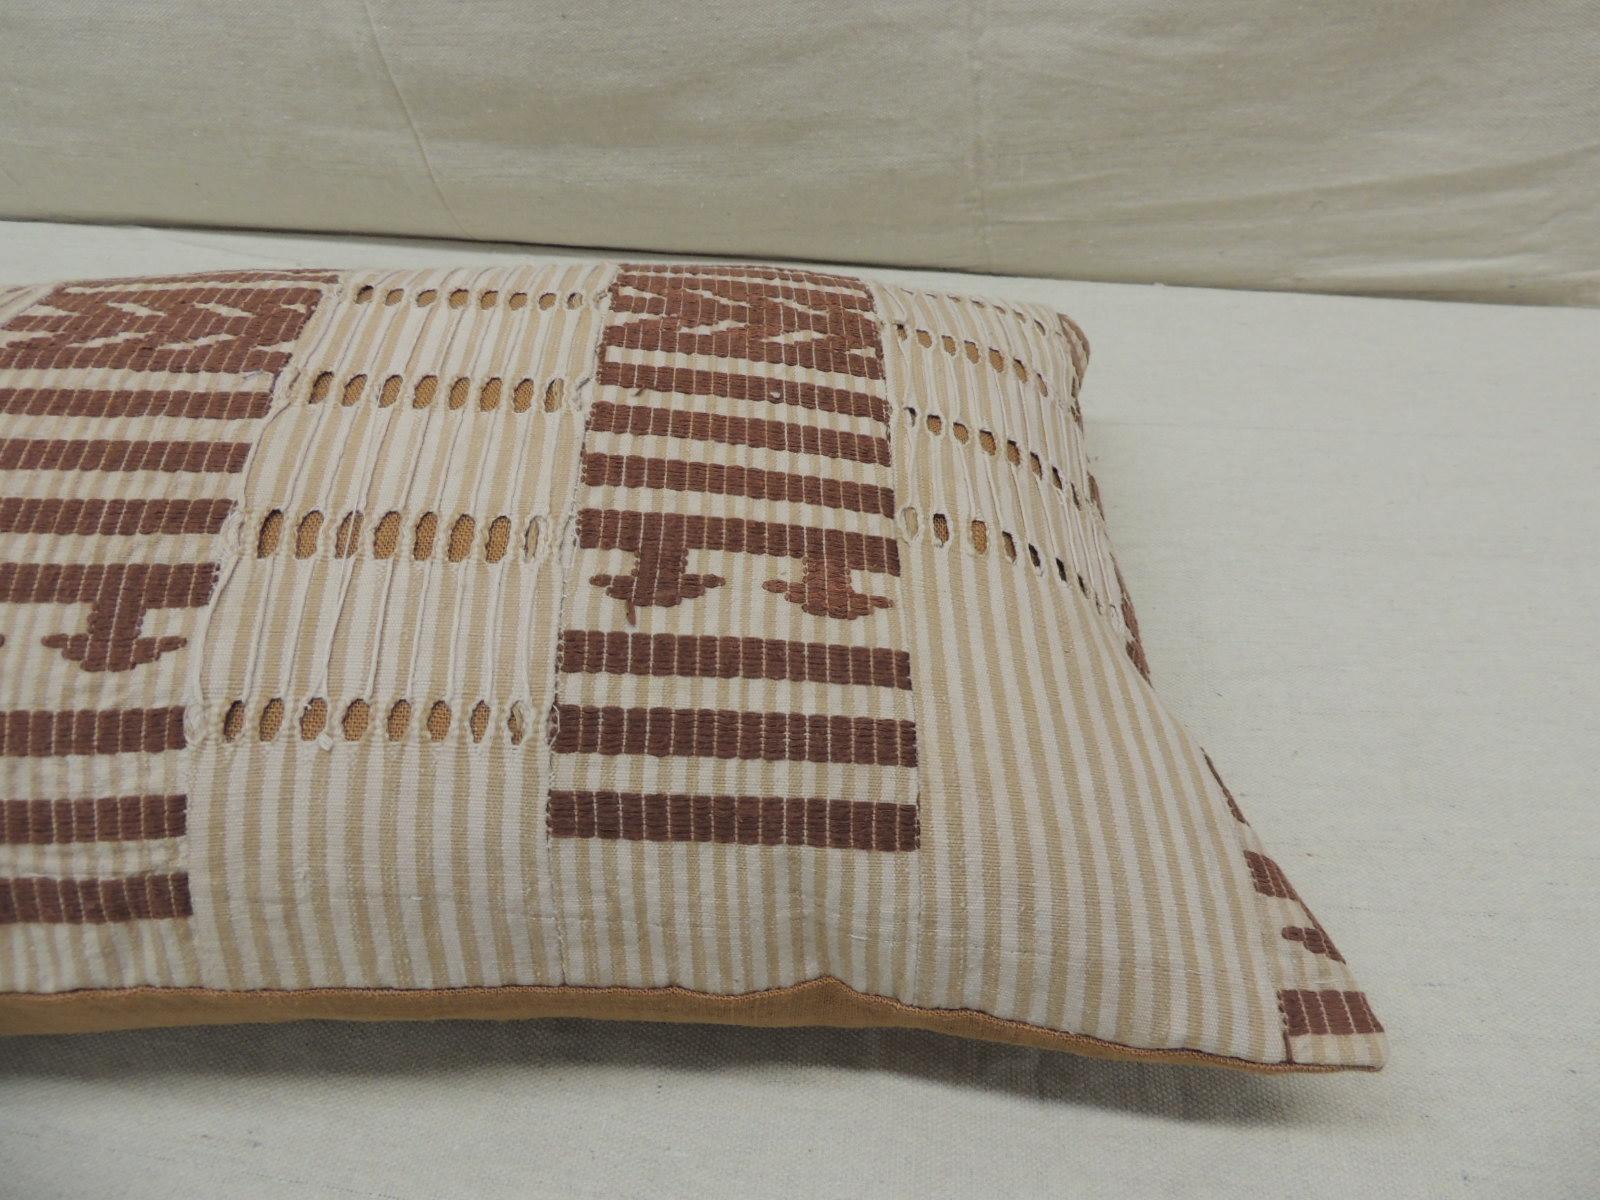 Hand-Crafted Vintage Tan and Brown Woven Ewe Stripweaves African Bolster Decorative Pillow